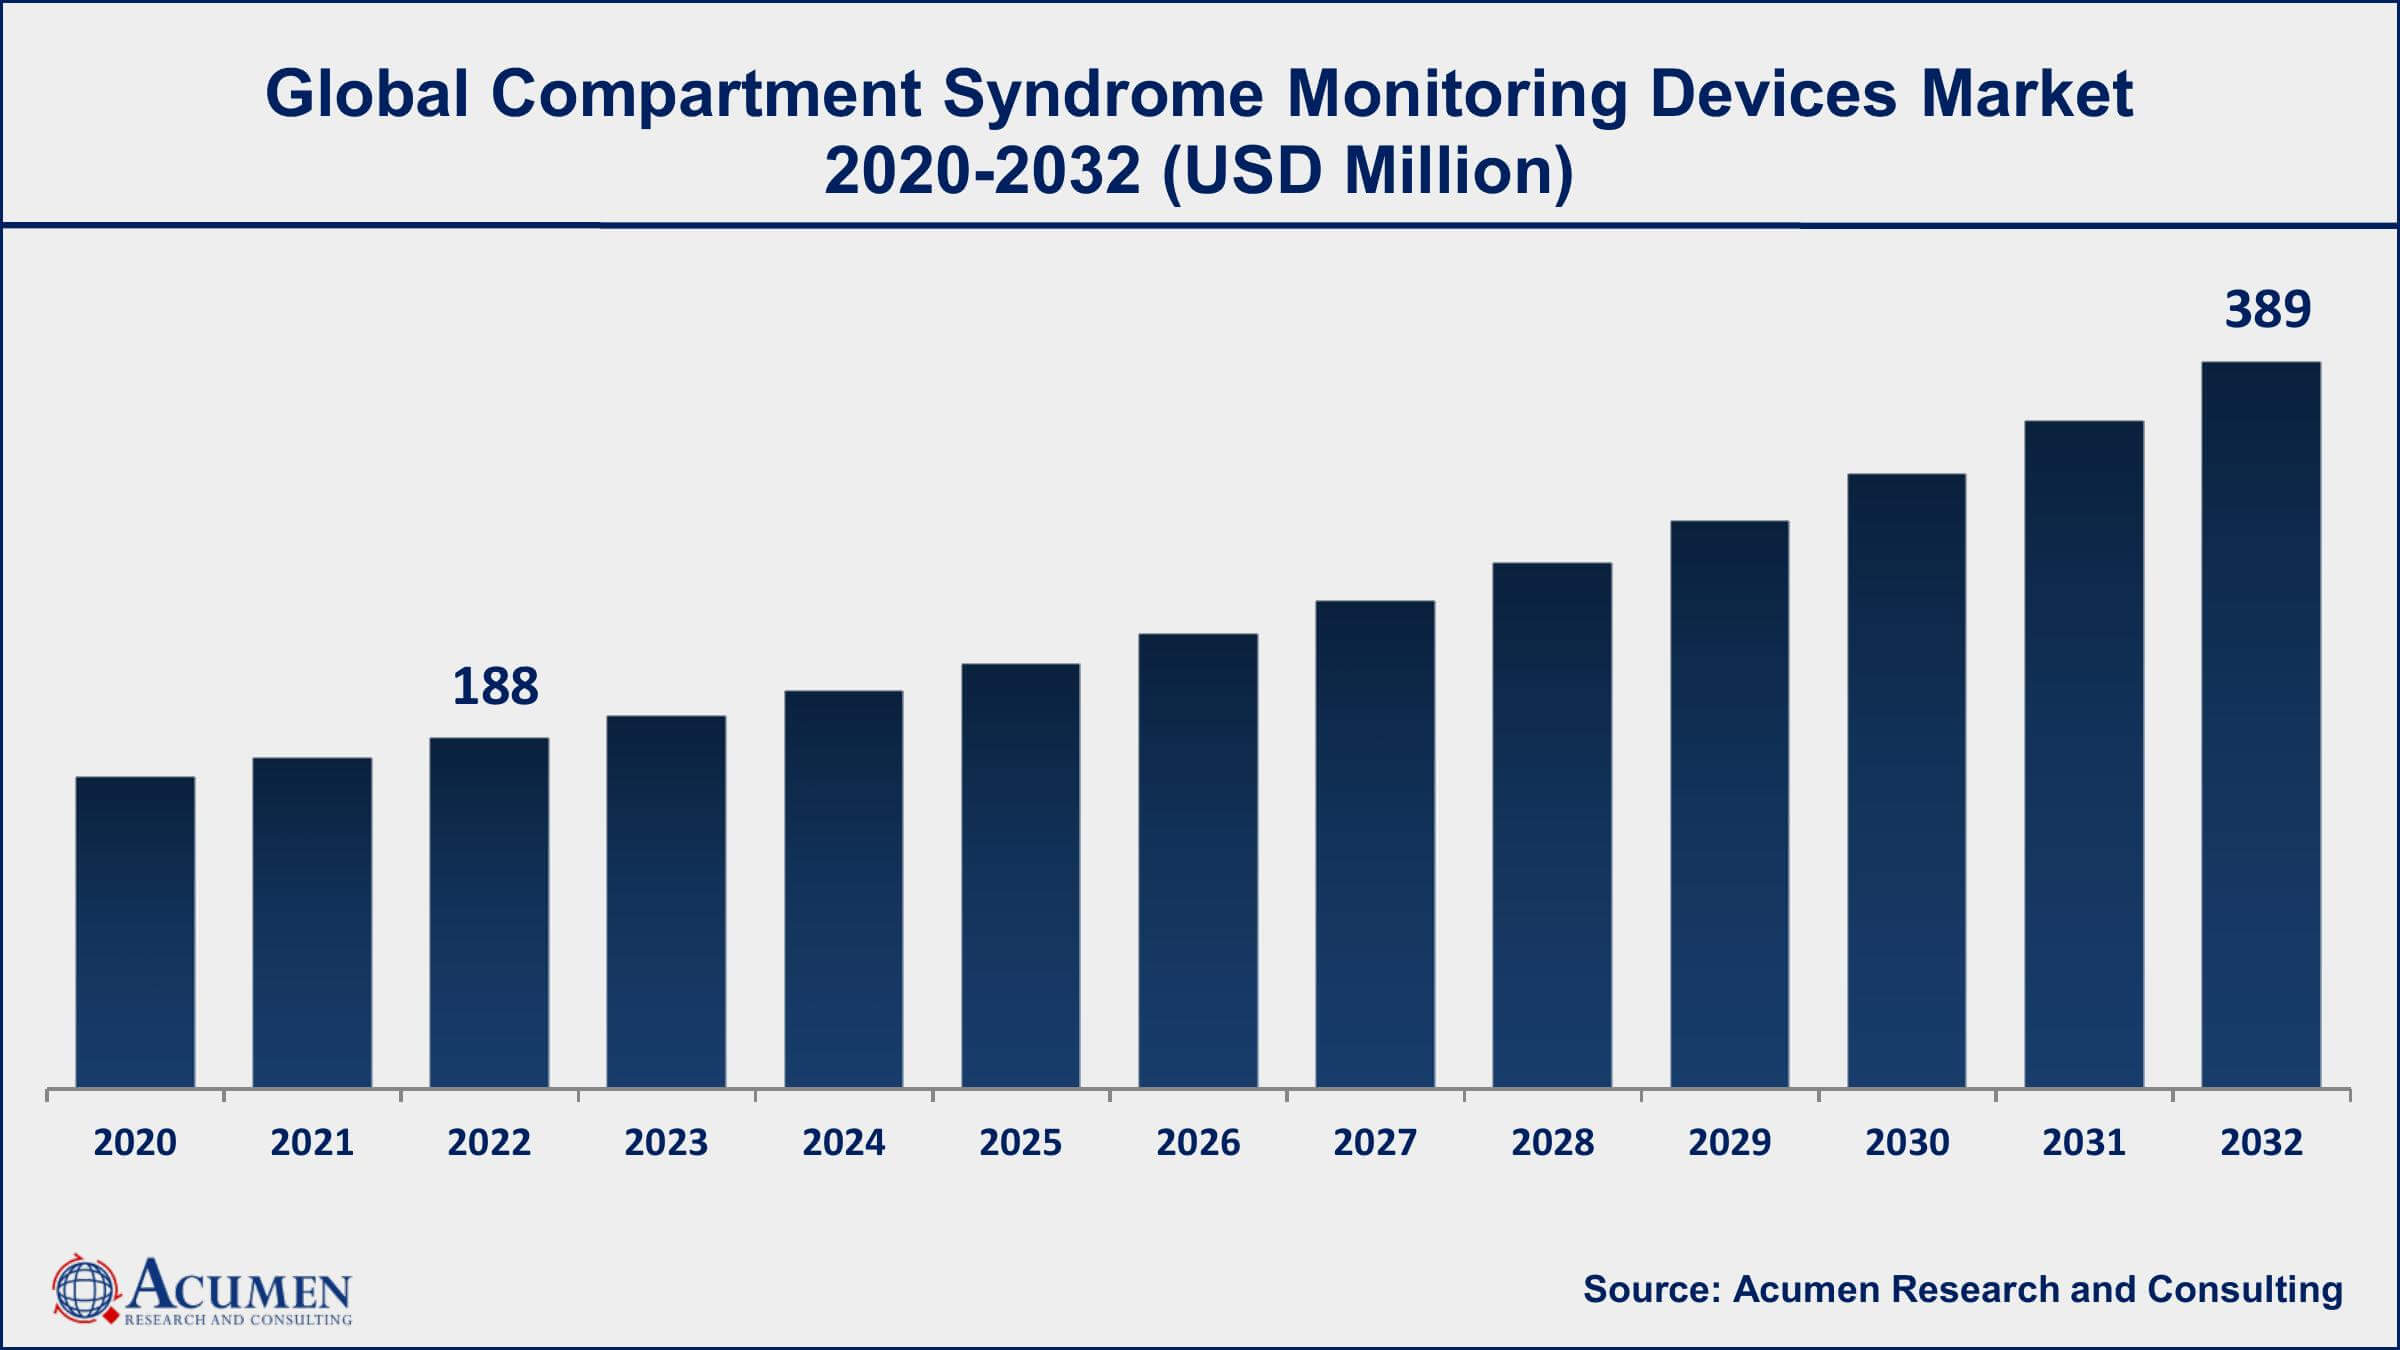 Compartment Syndrome Monitoring Devices Market Drivers